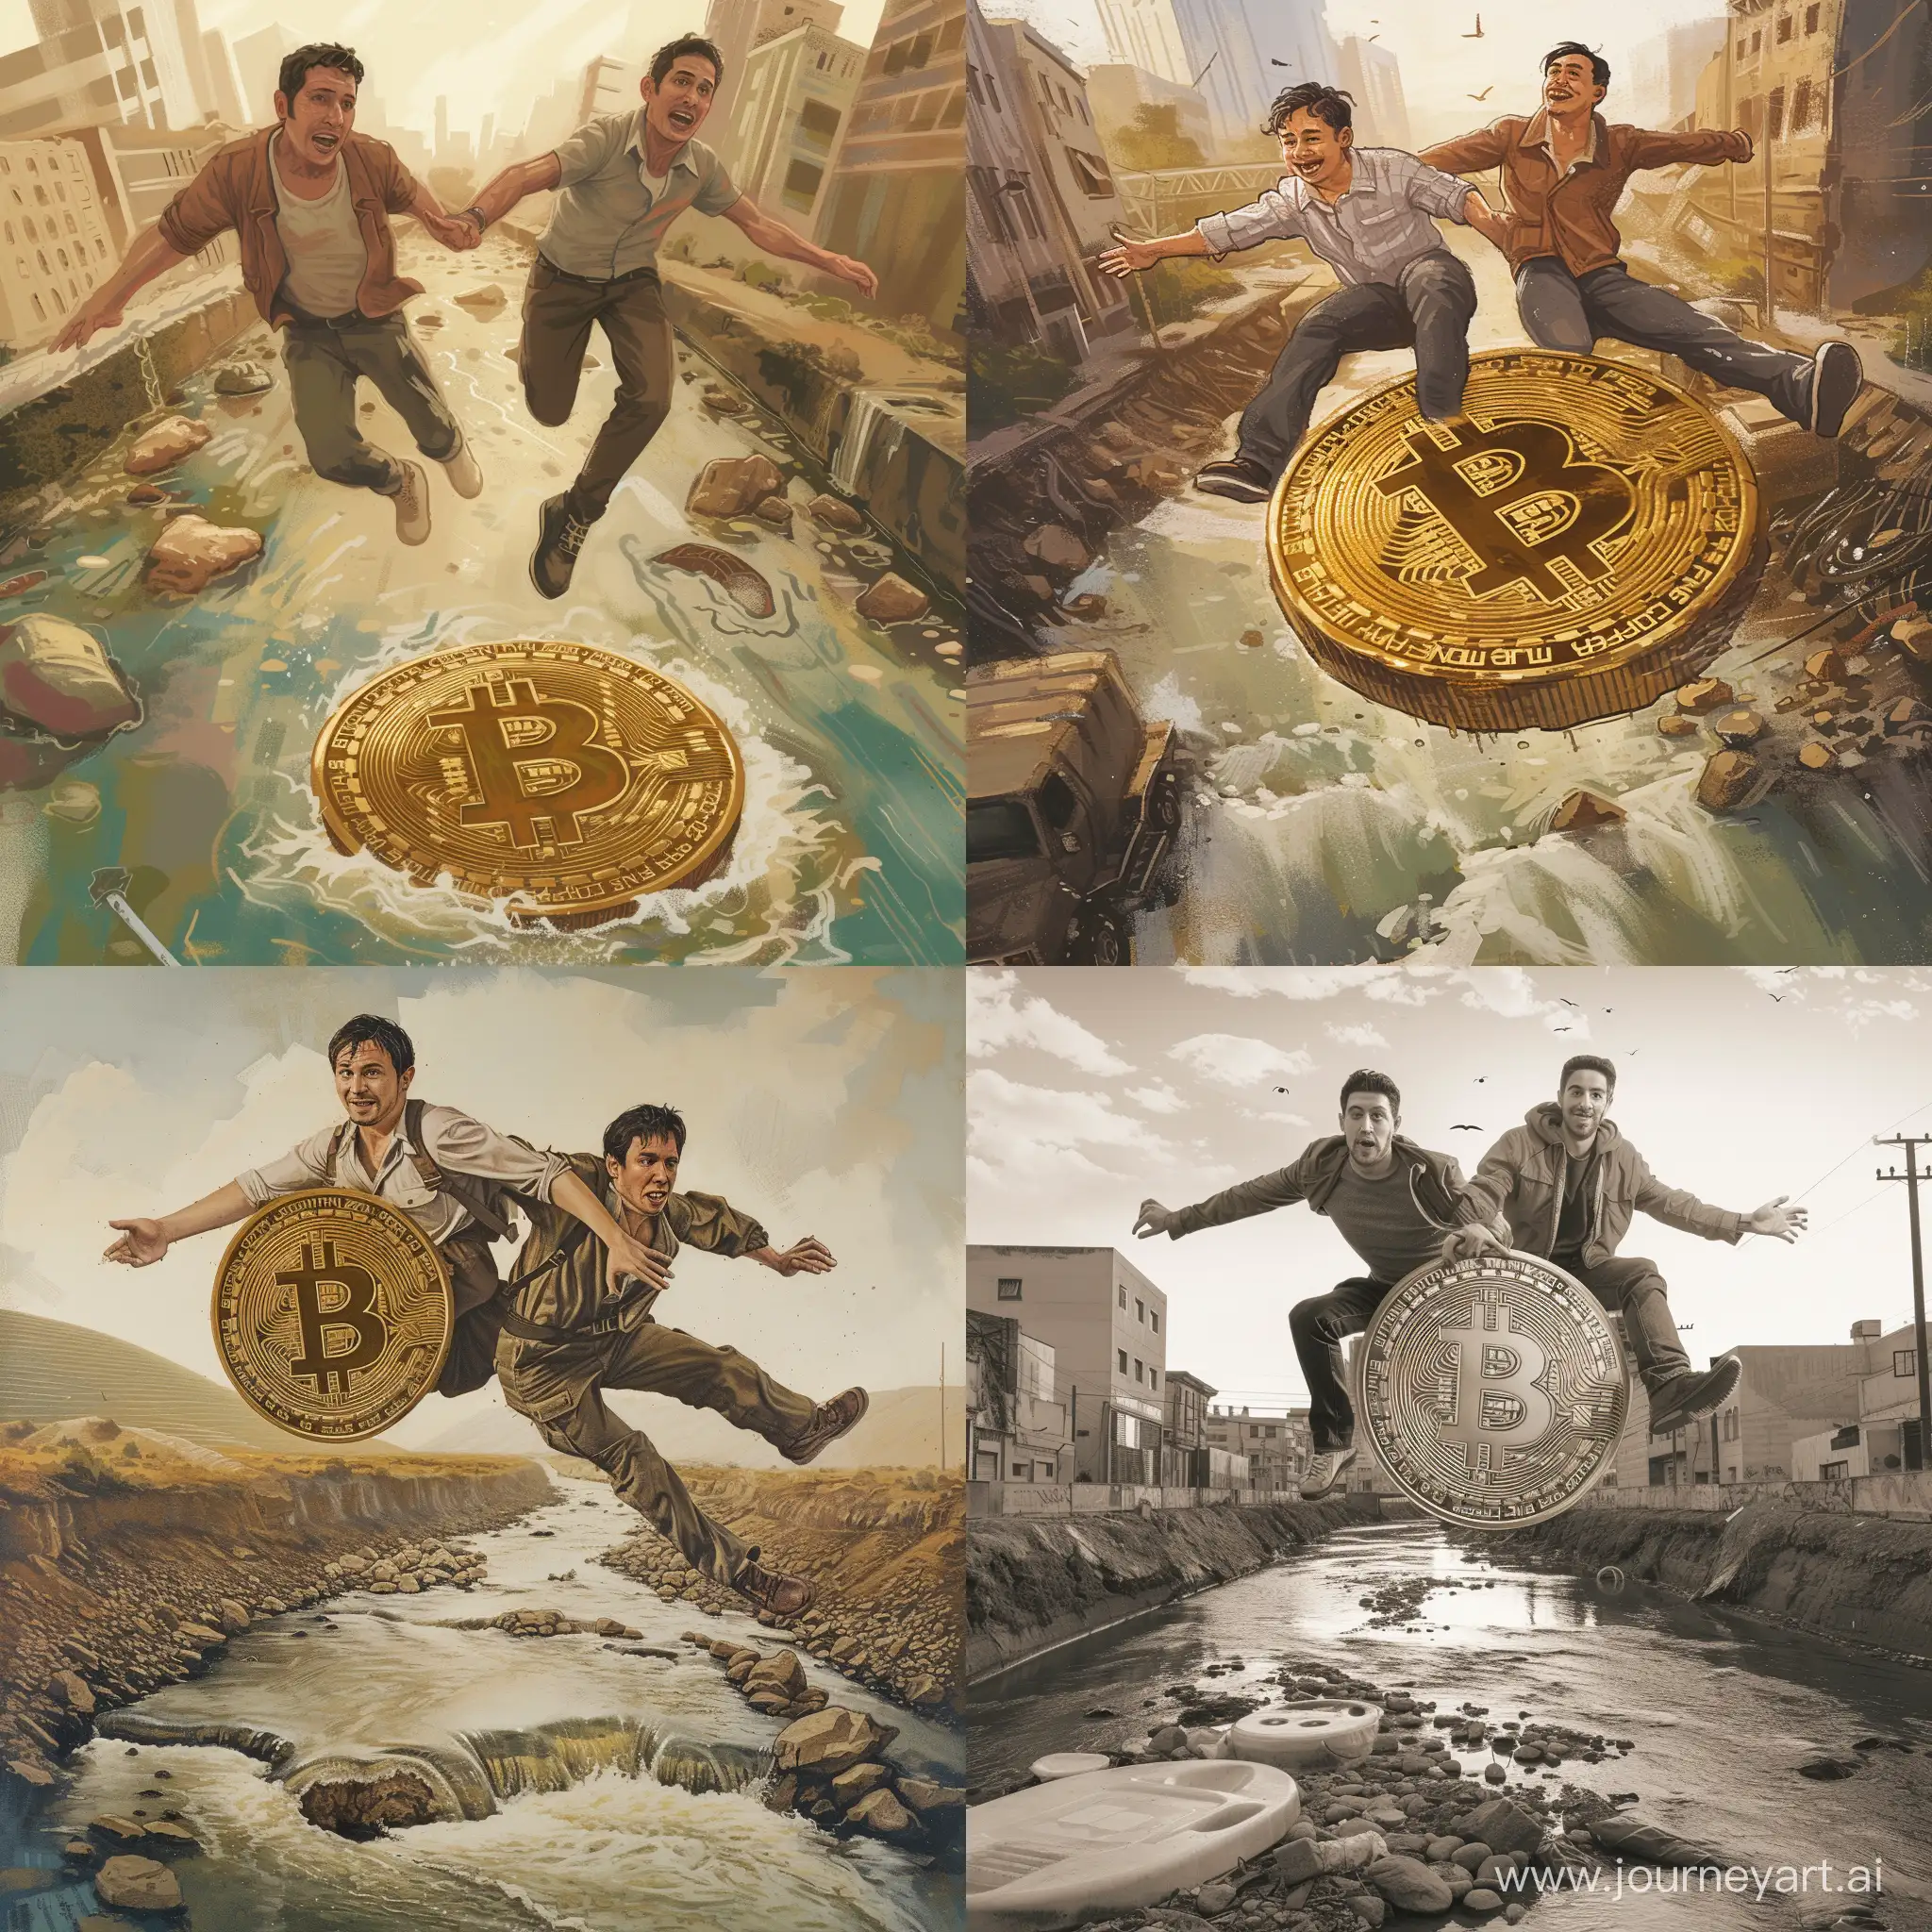 Art. Two handsome men flying on a giant Bitcoin, over a river of sewage and effluence.